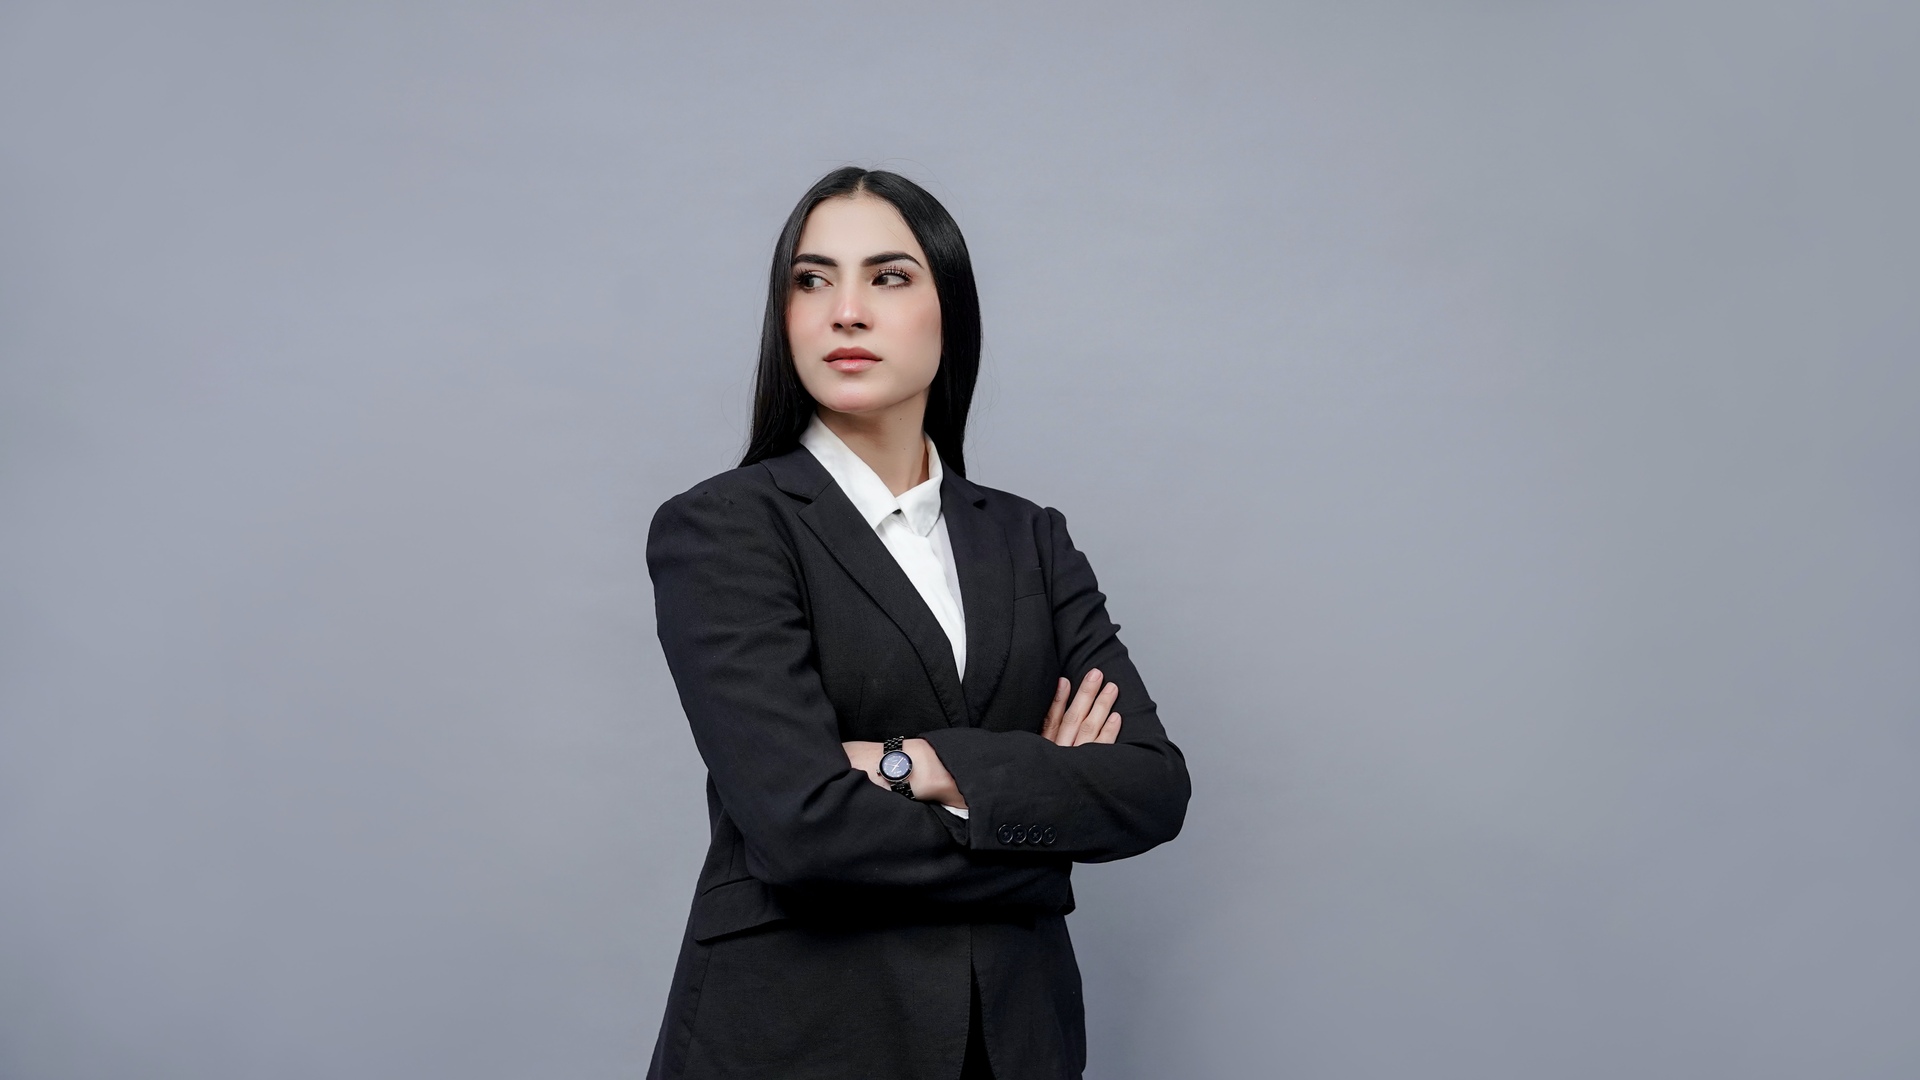 Woman dressed in business attire